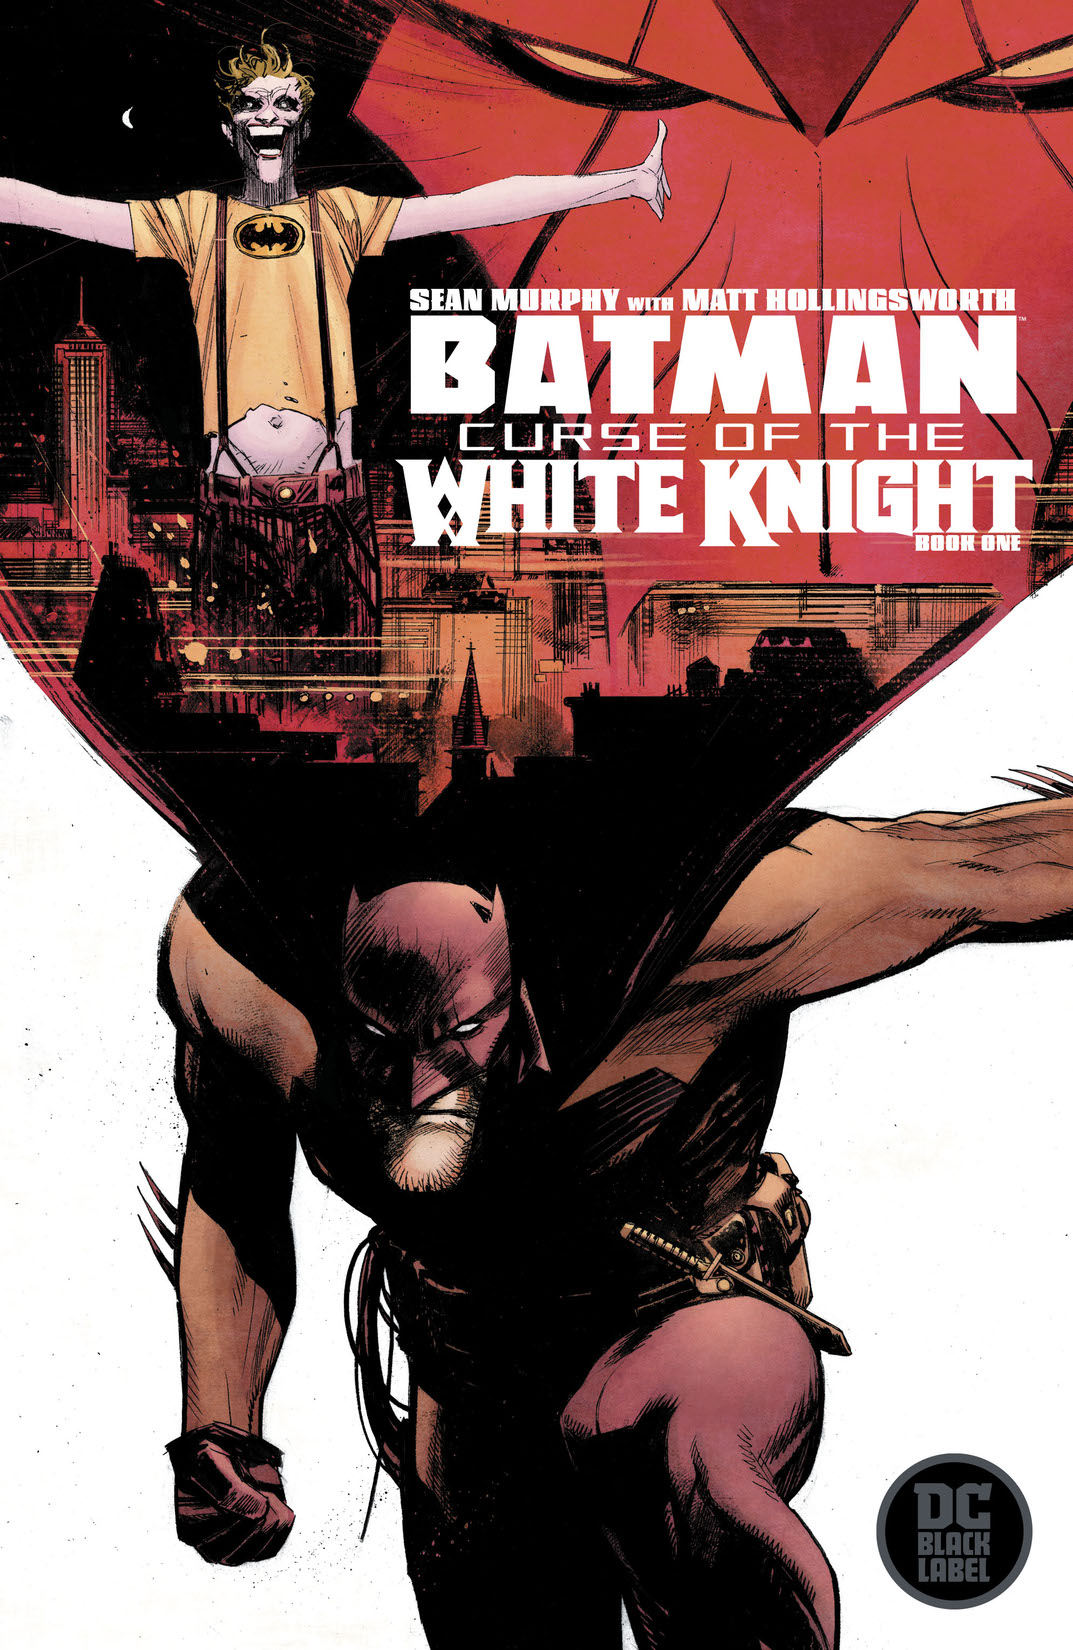 Batman: Curse of the White Knight #1 preview images